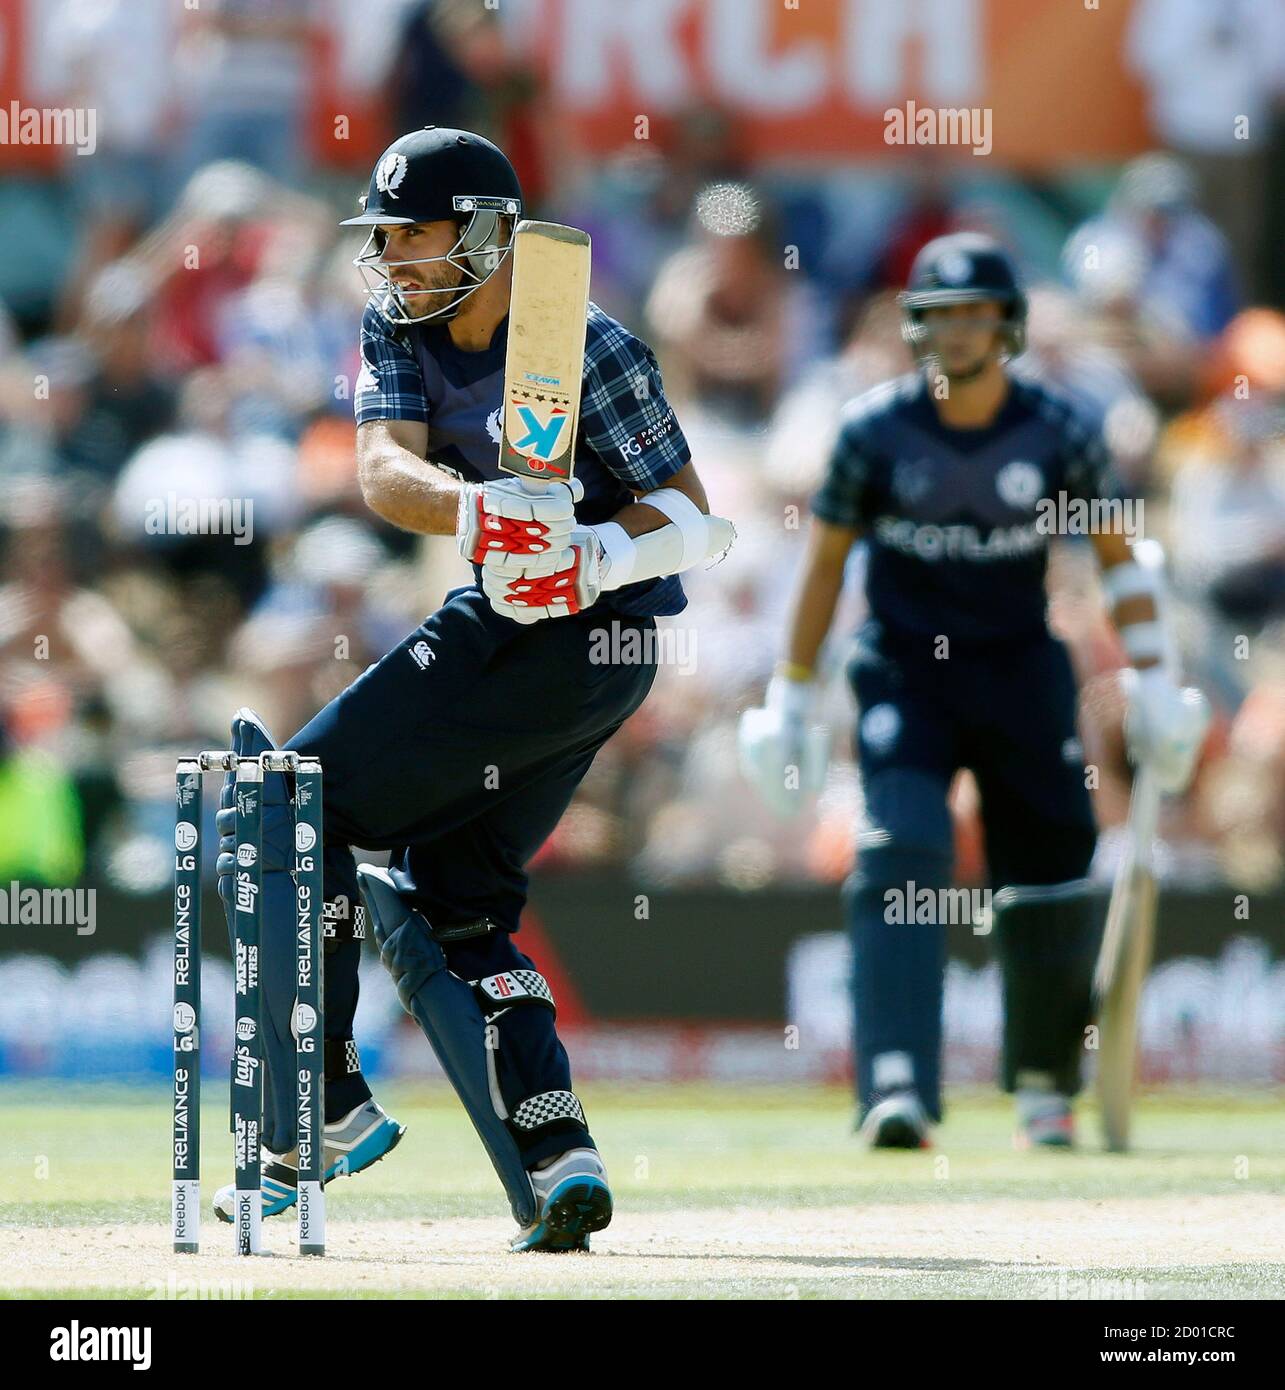 Scotland's Kyle Coetzer follows the ball flight during their Cricket World Cup match against England in Christchurch, February 23, 2015.    REUTERS/Nigel Marple   (NEW ZEALAND - Tags: SPORT CRICKET) Stock Photo